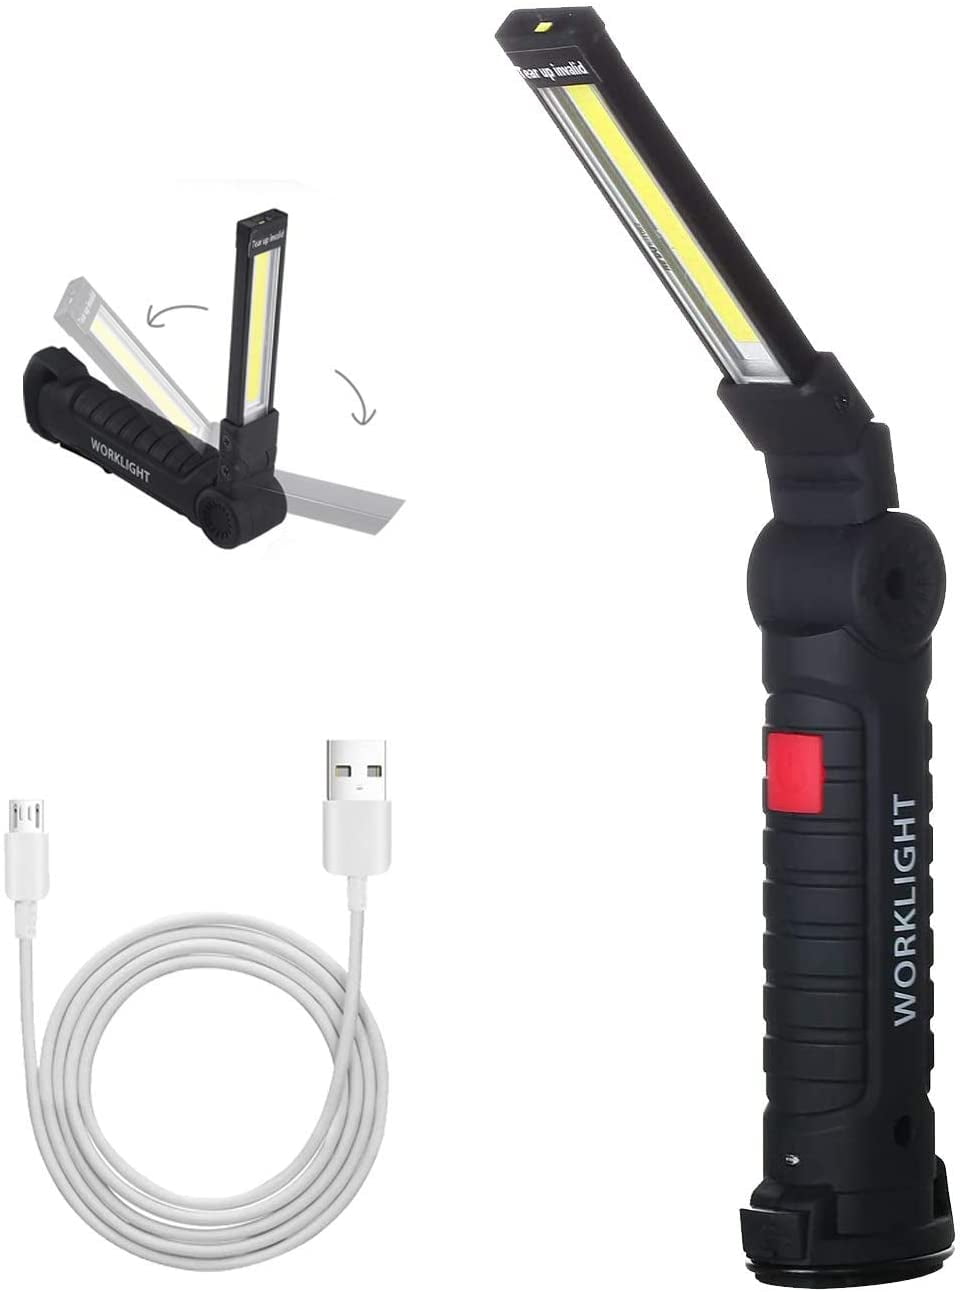 Mini Lamp LED Work Light COB Magnetic Inspection Torch USB Rechargeable Folding 